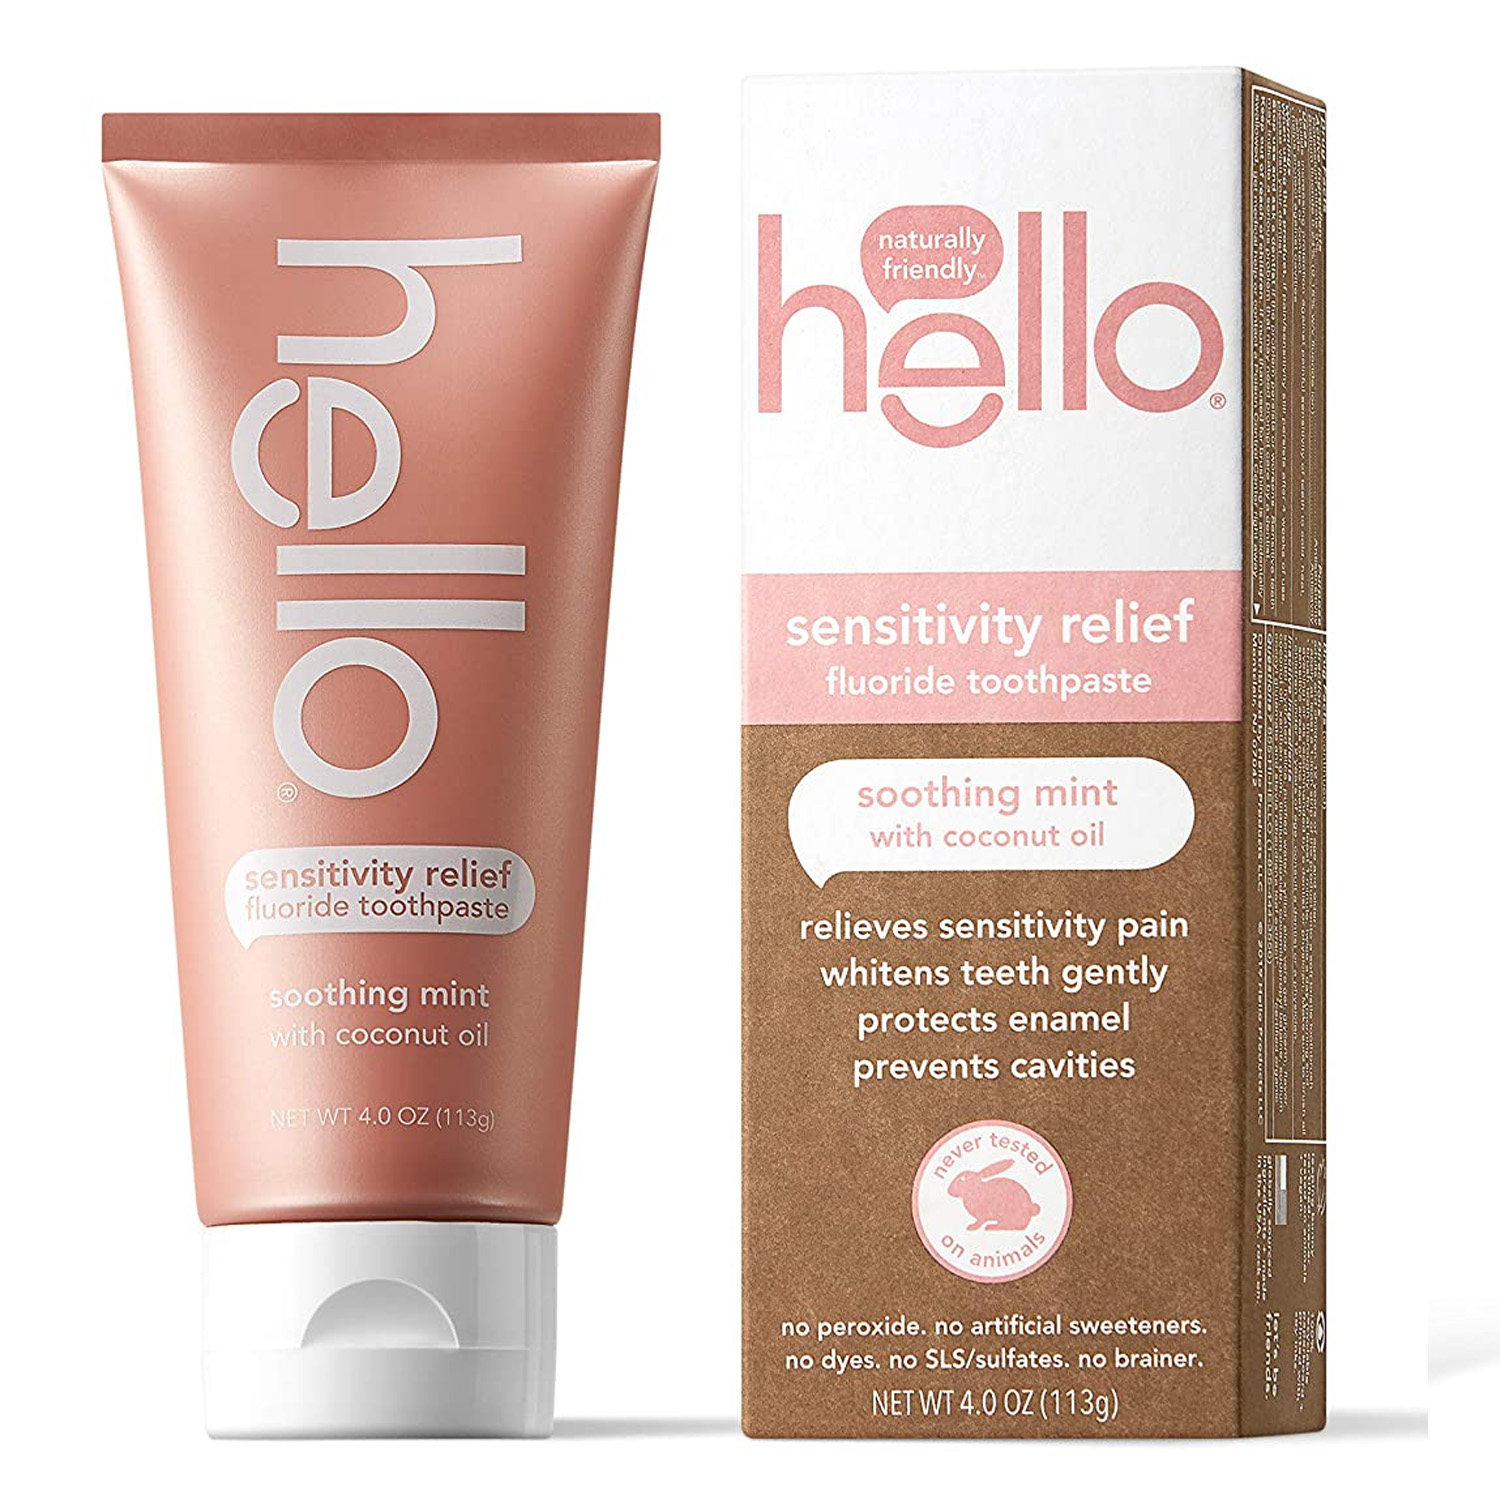 sensitive relief from hello